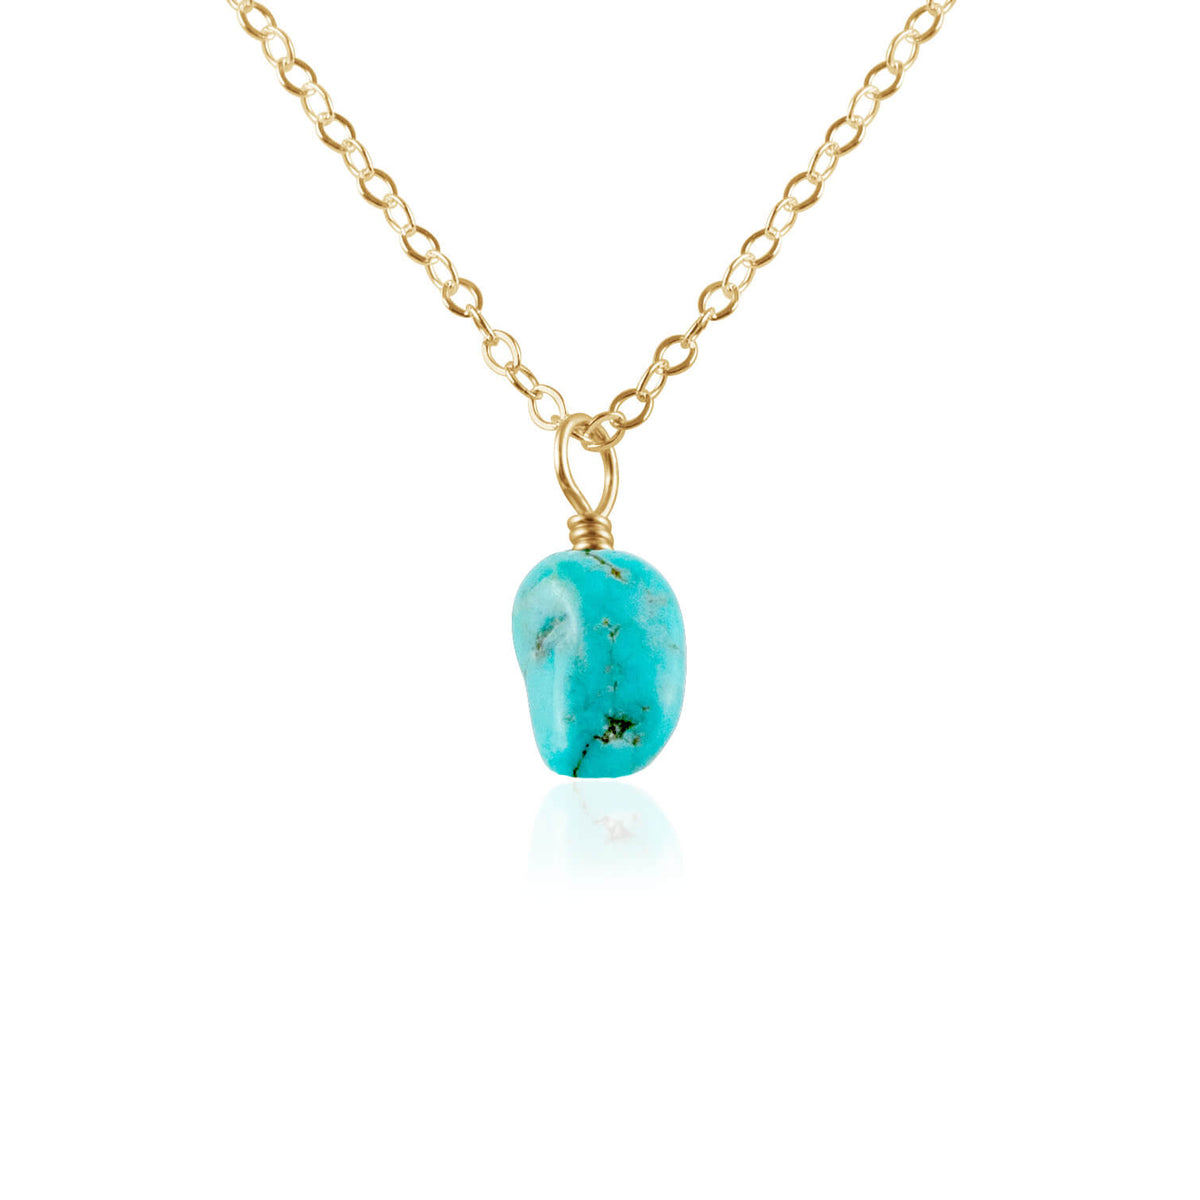 Raw Crystal Pendant Necklace - Turquoise - 14K Gold Fill - Luna Tide Handmade Jewellery